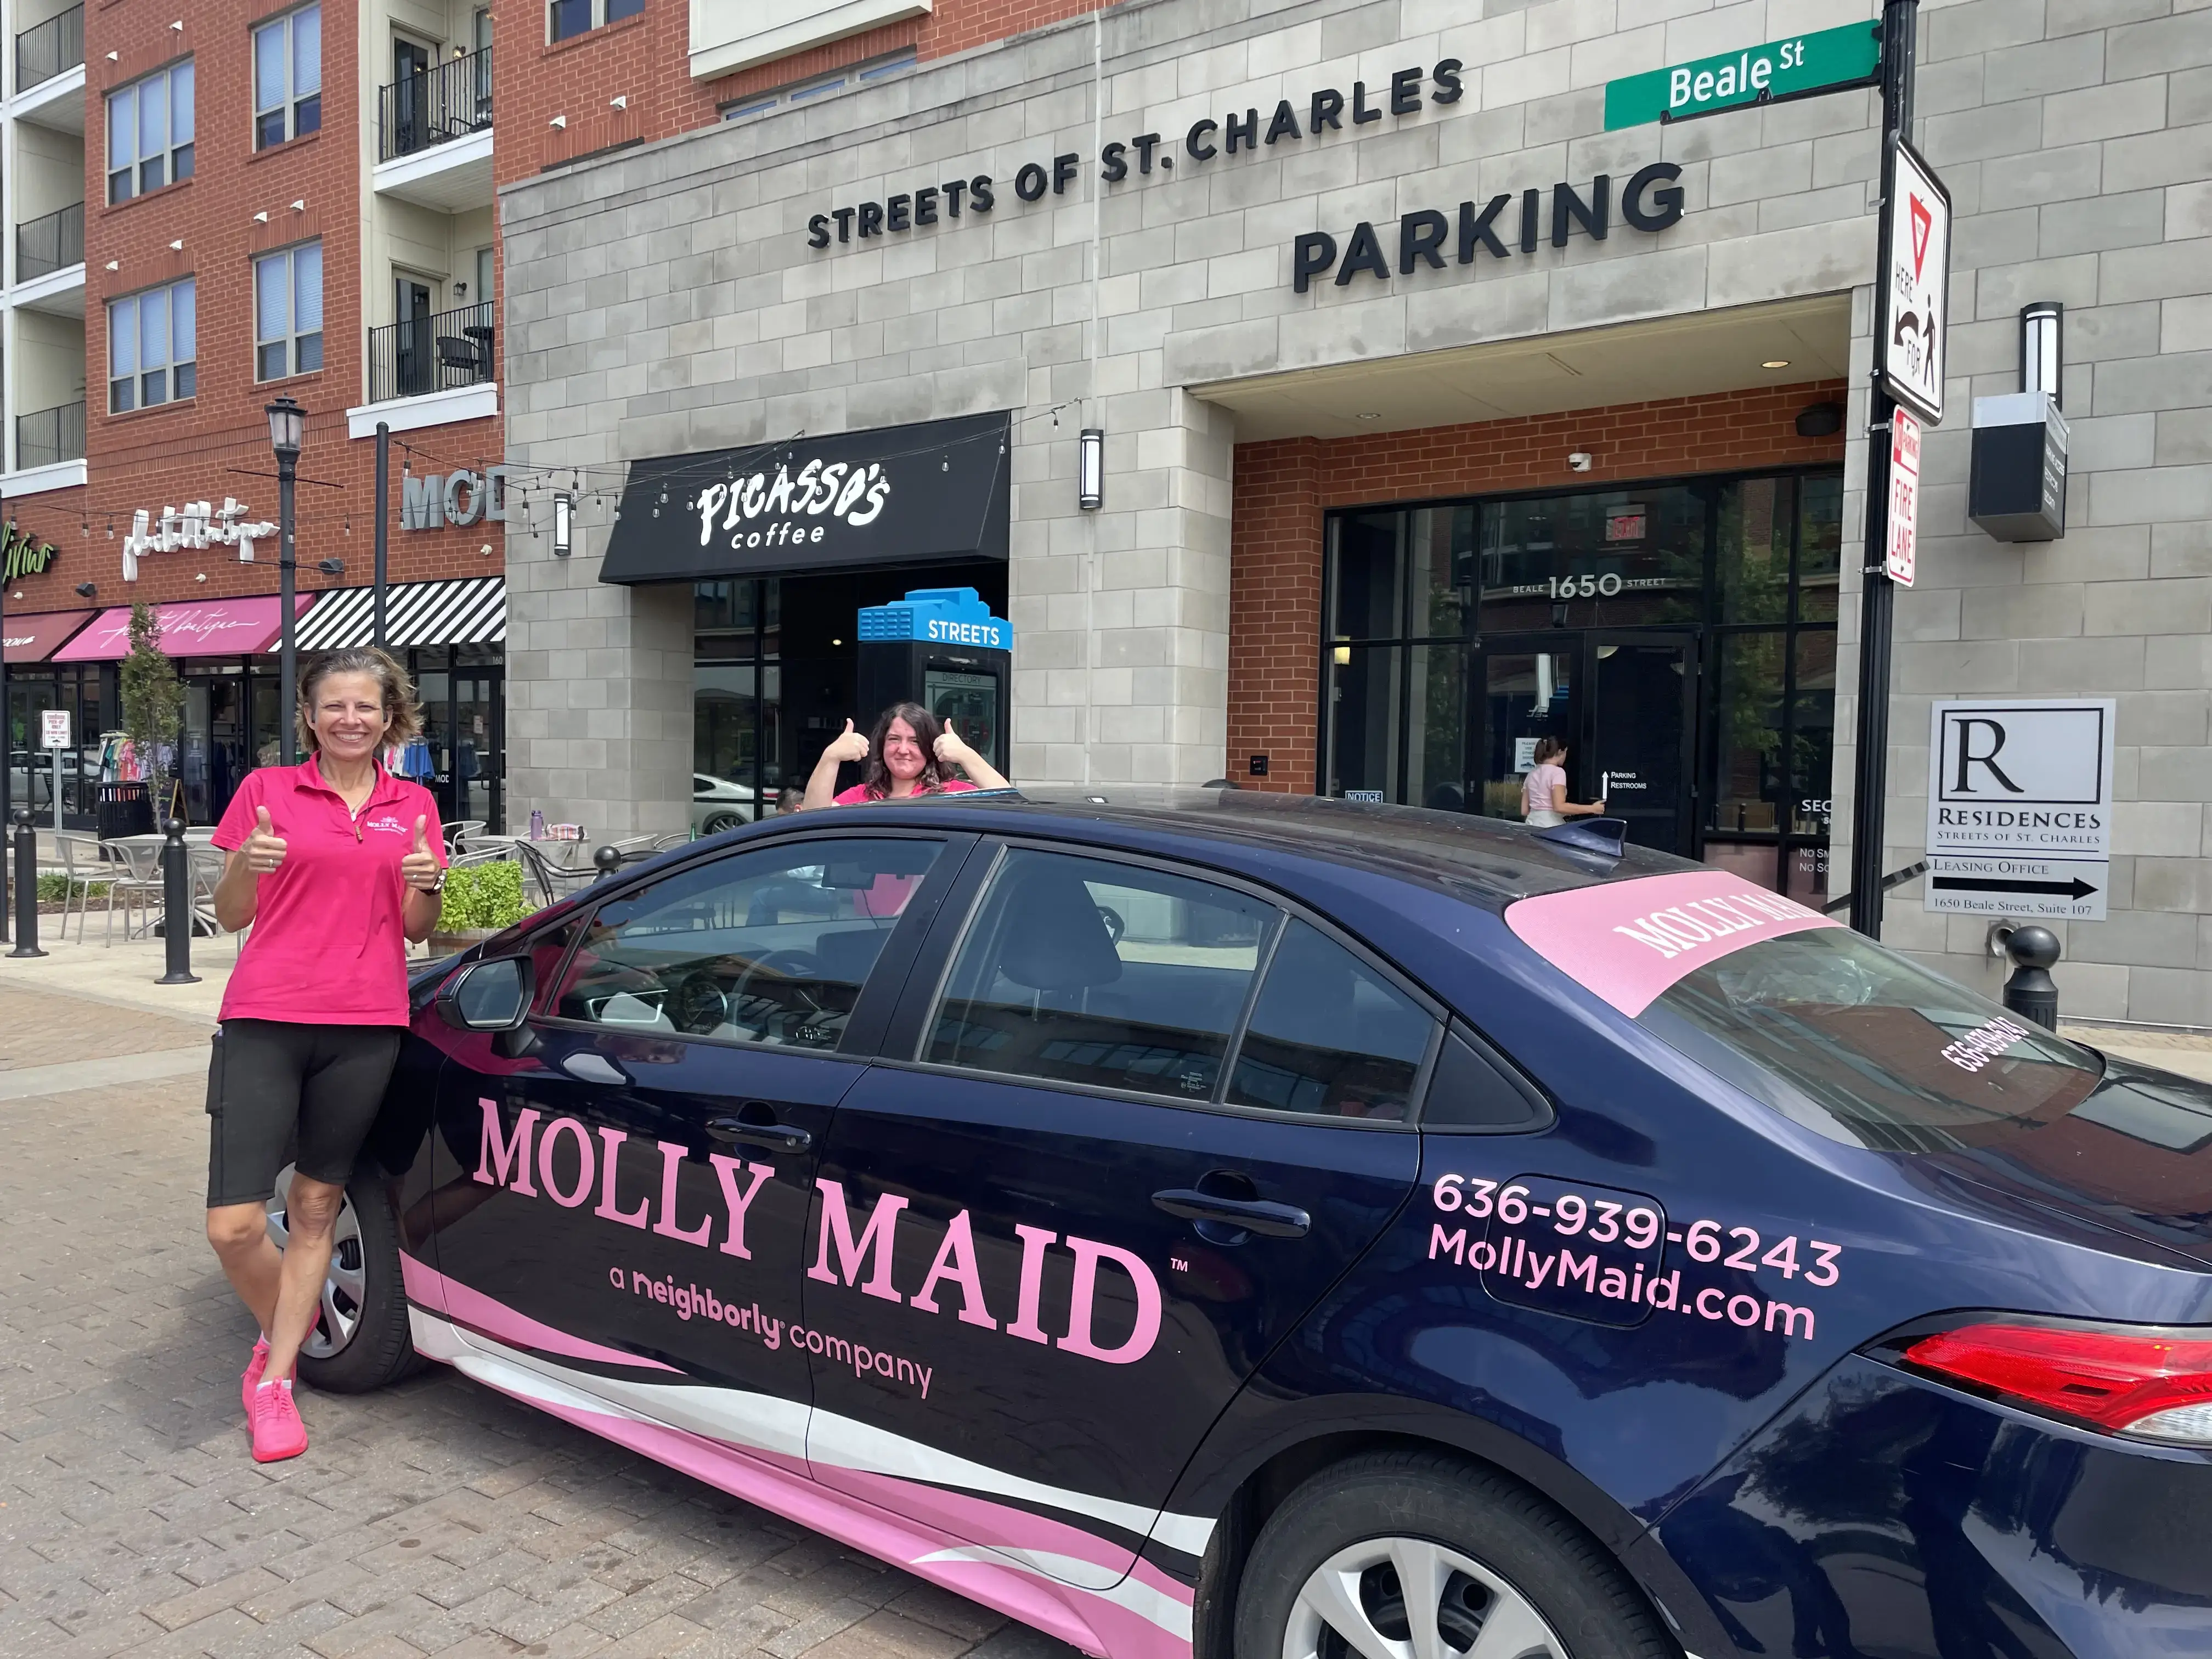 Molly Maid of St. Charles County house cleaning staff standing next to company car